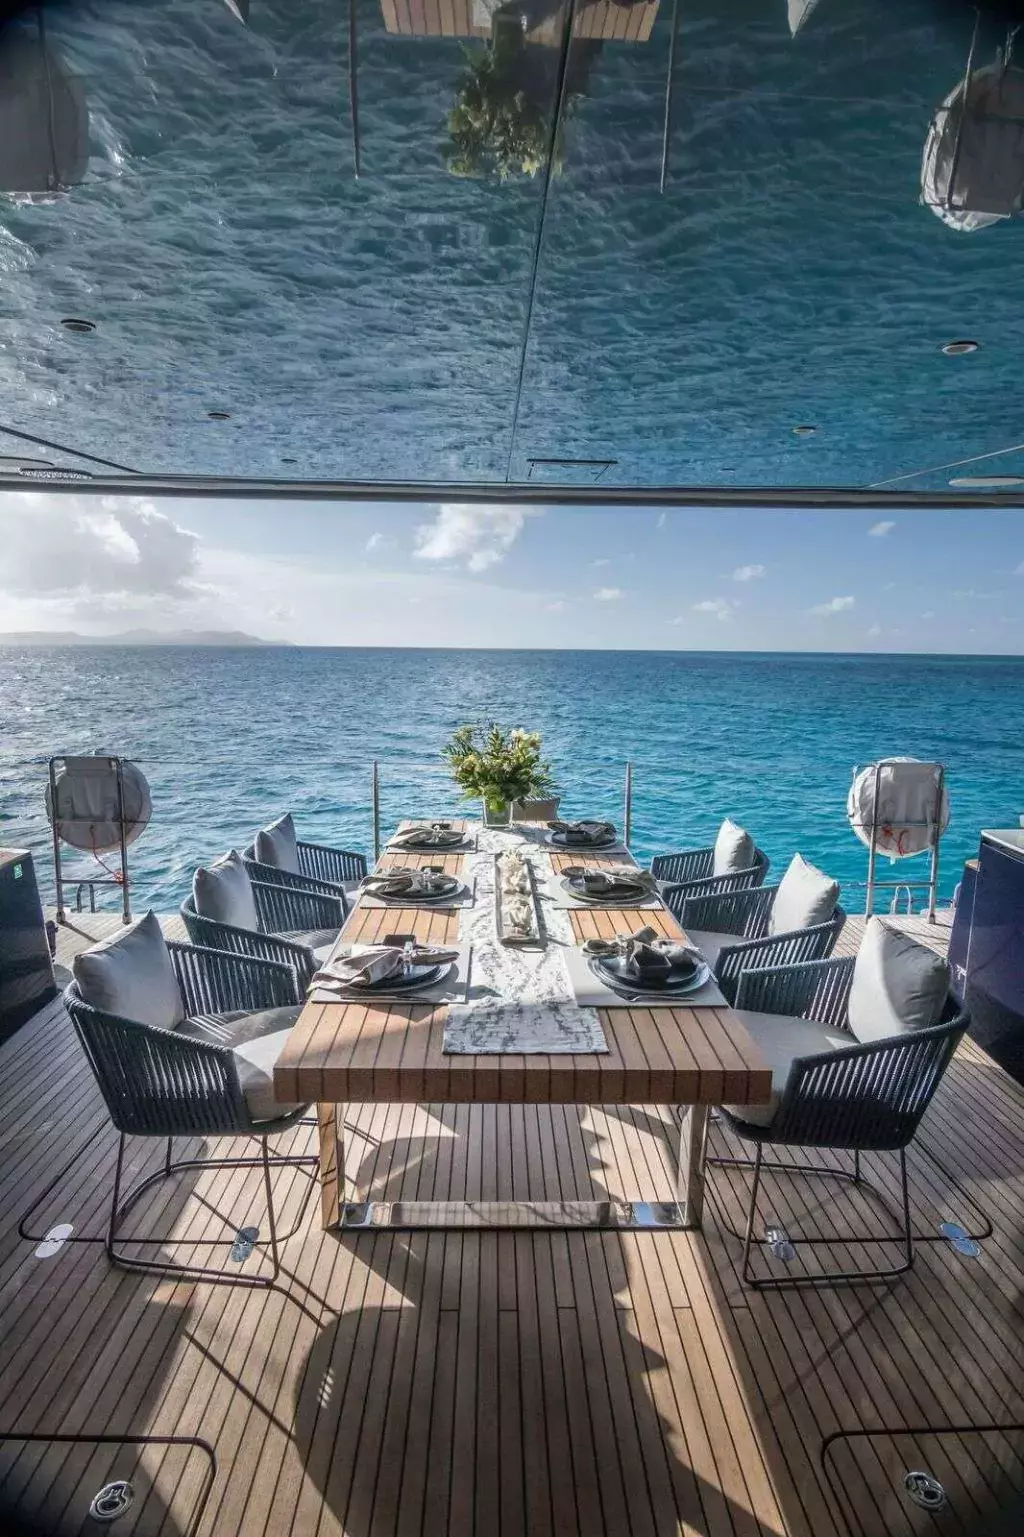 Relentless by Sunreef Yachts - Top rates for a Rental of a private Sailing Catamaran in Martinique